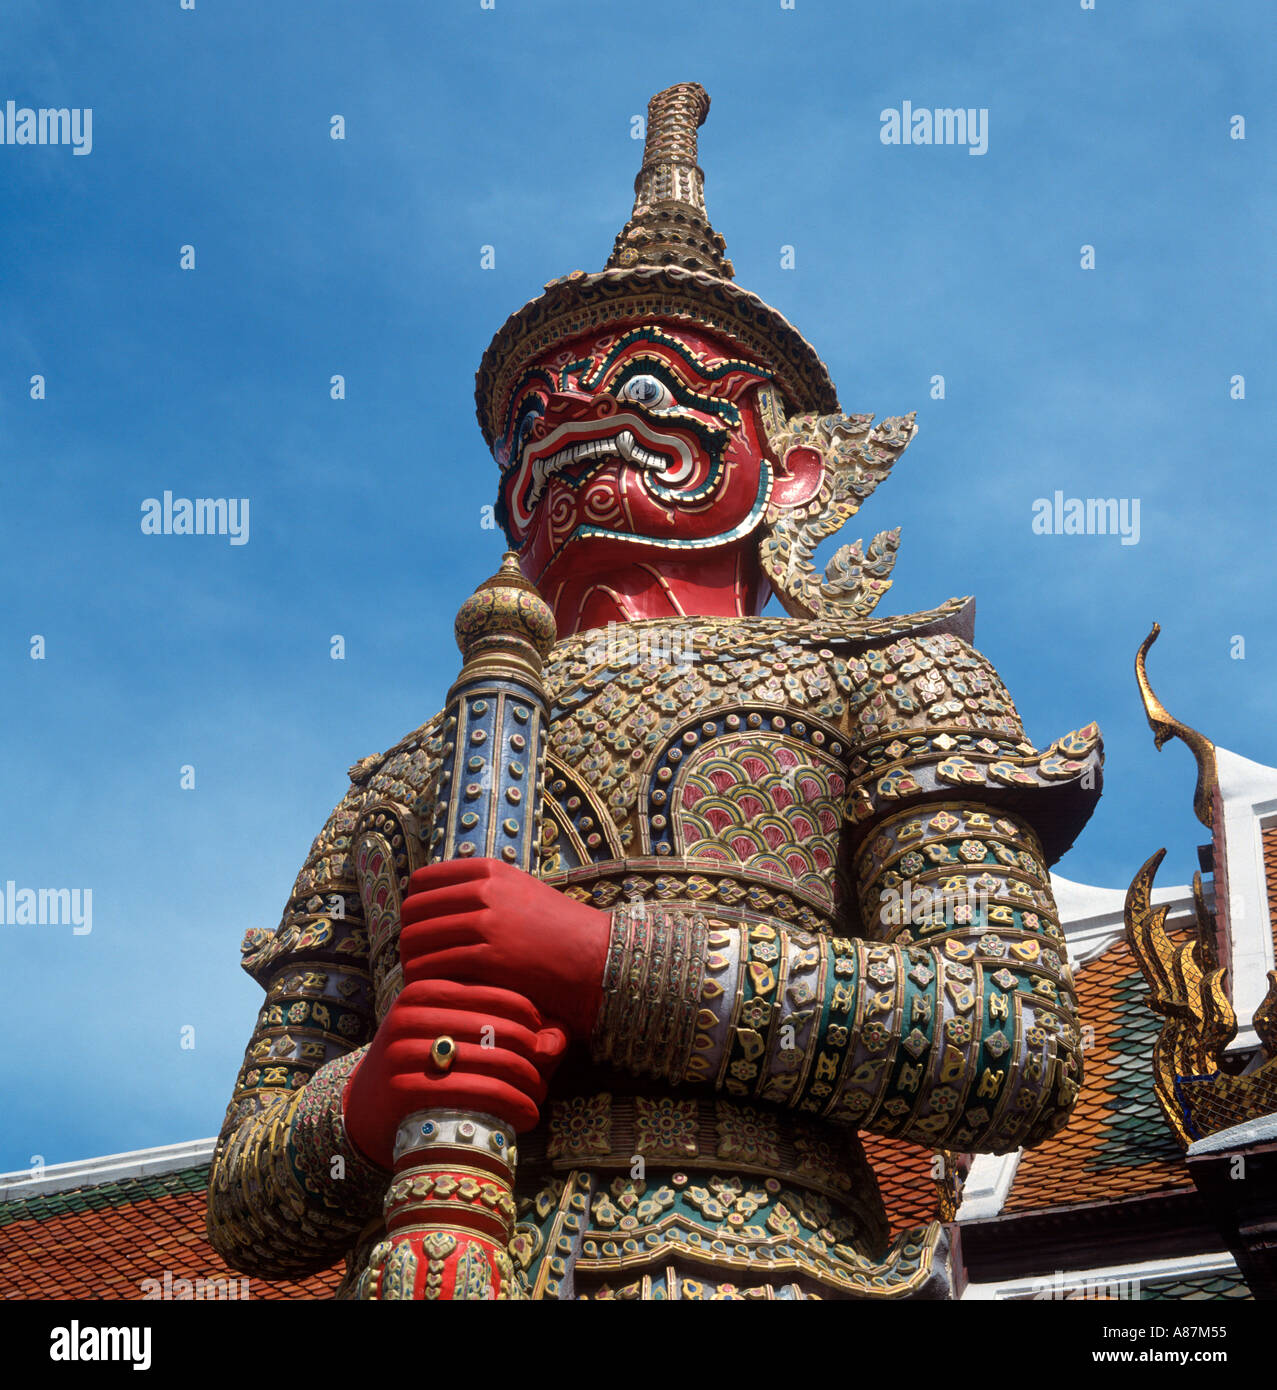 Giant Statue on the Upper Terrace, Grand Palace, Bangkok, Thailand Stock Photo